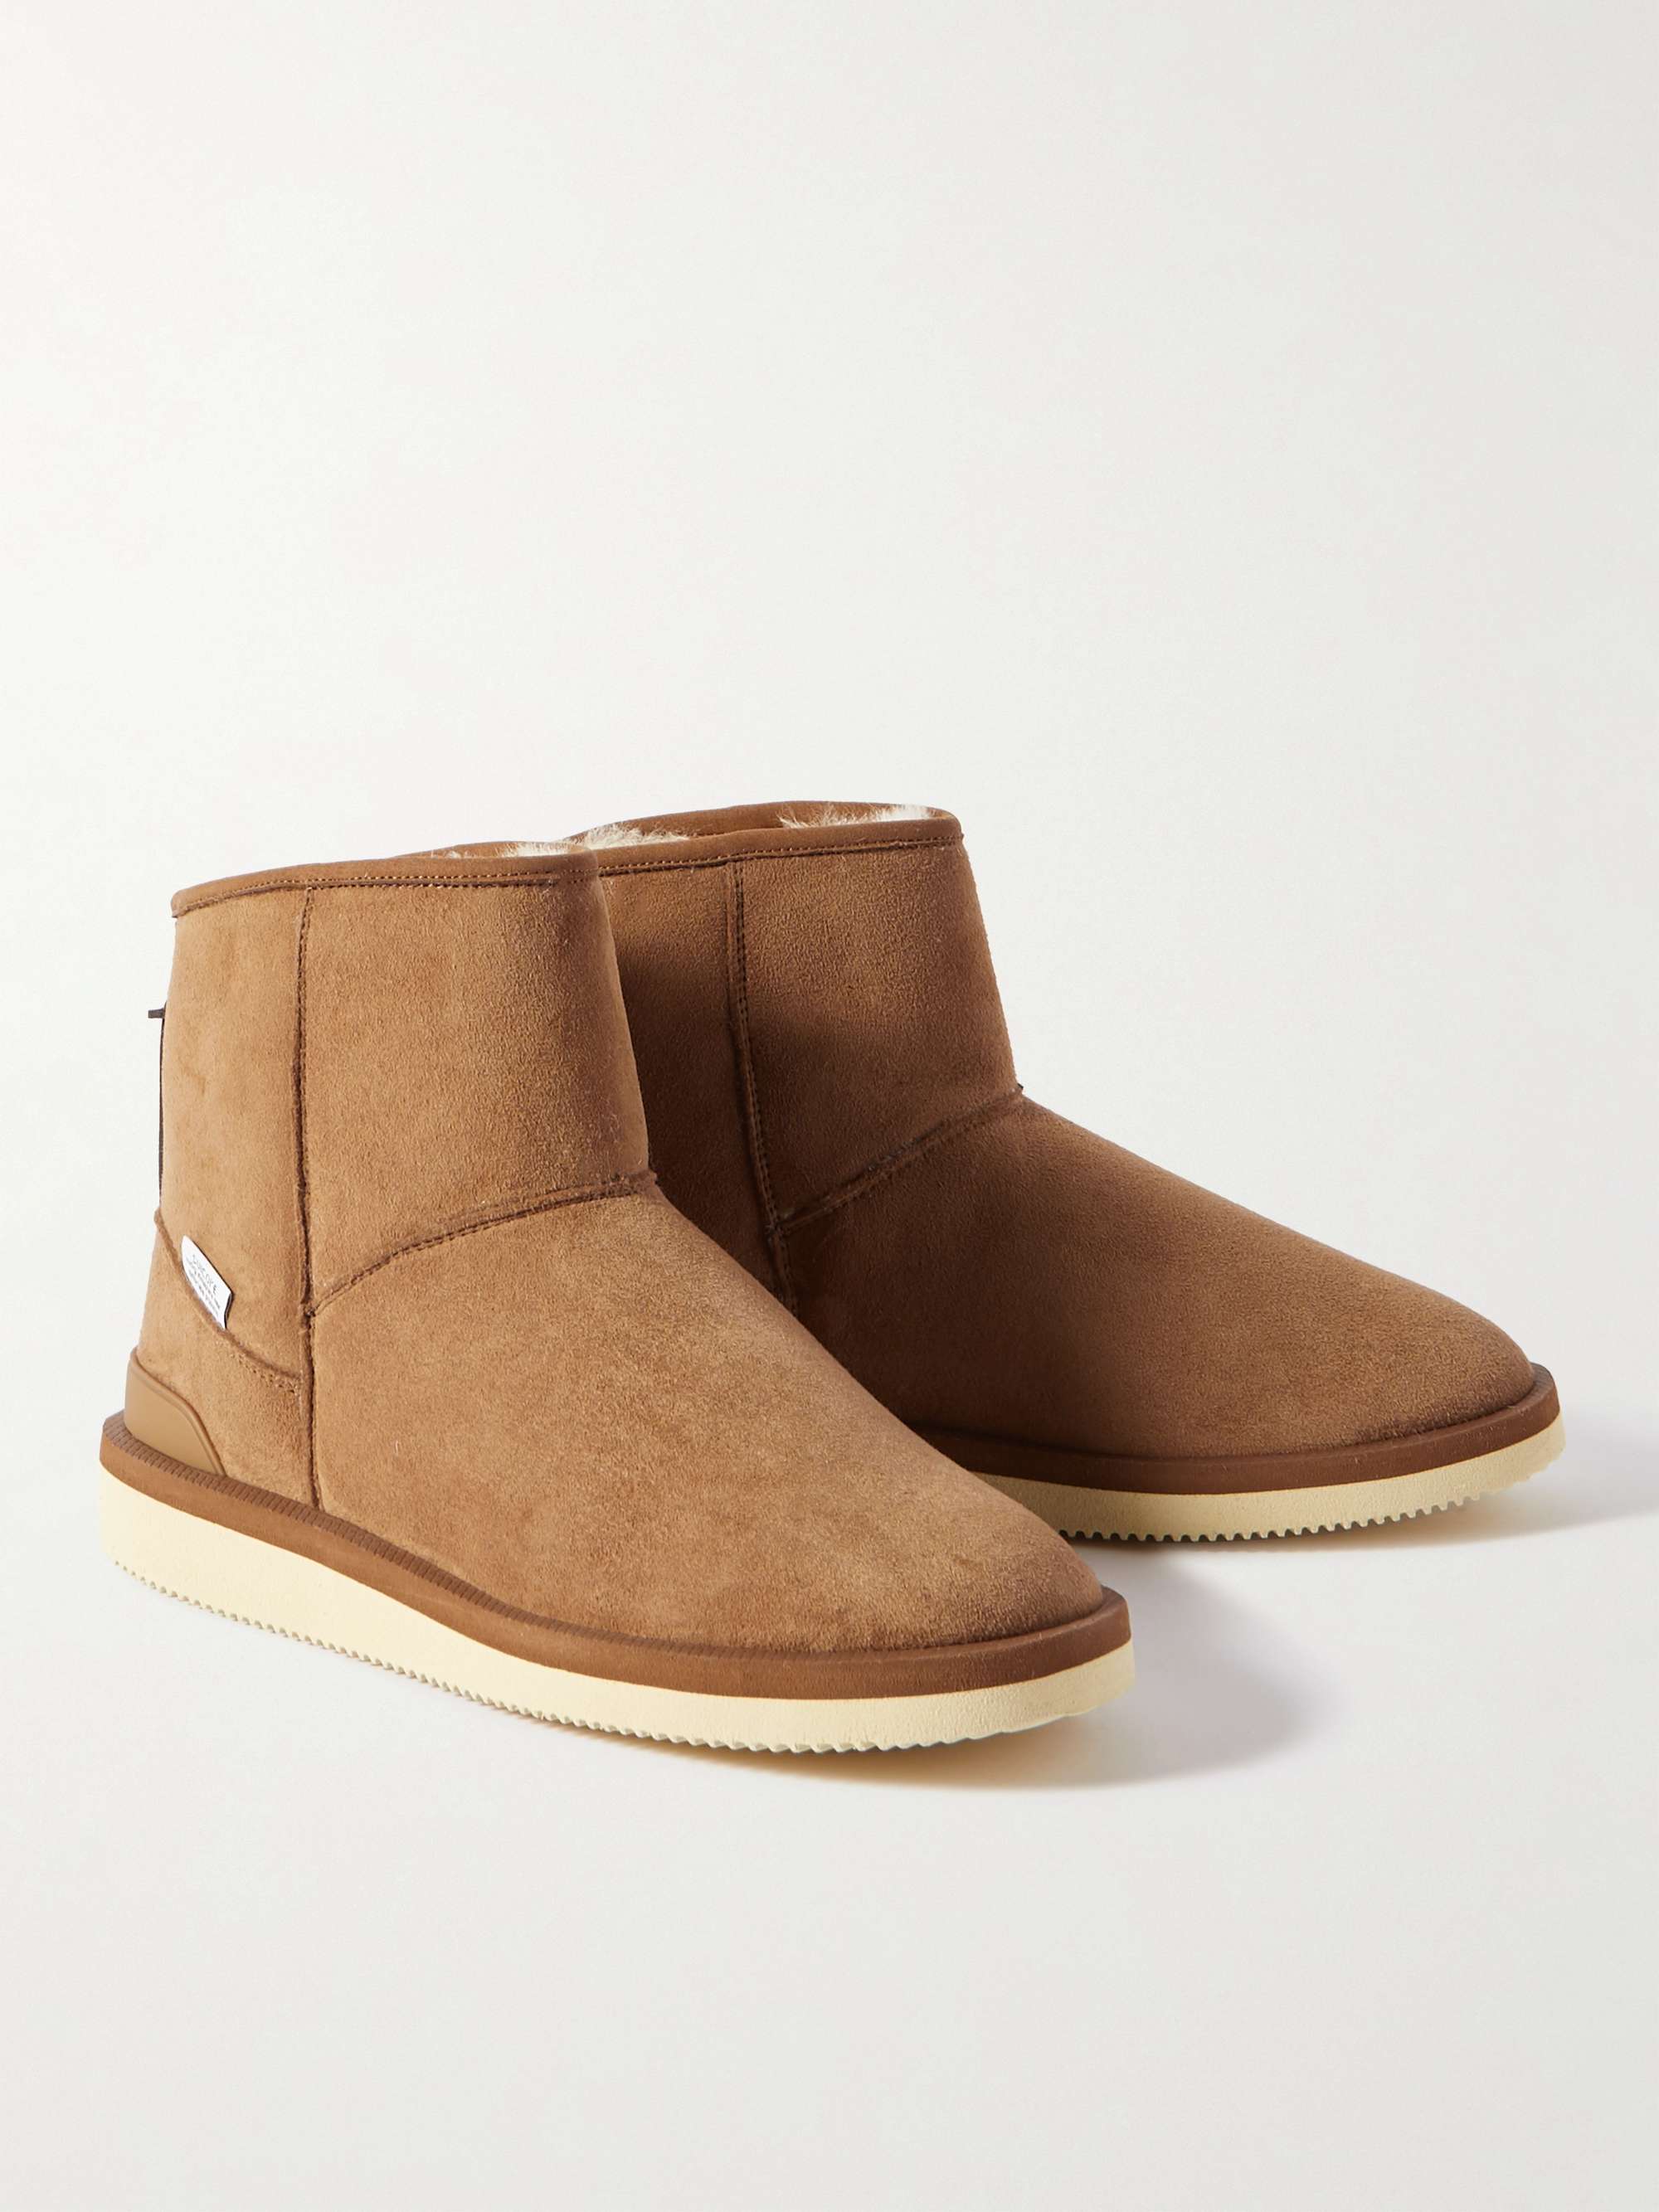 SUICOKE ELS-M2ab-MID Shearling-Lined Suede Boots